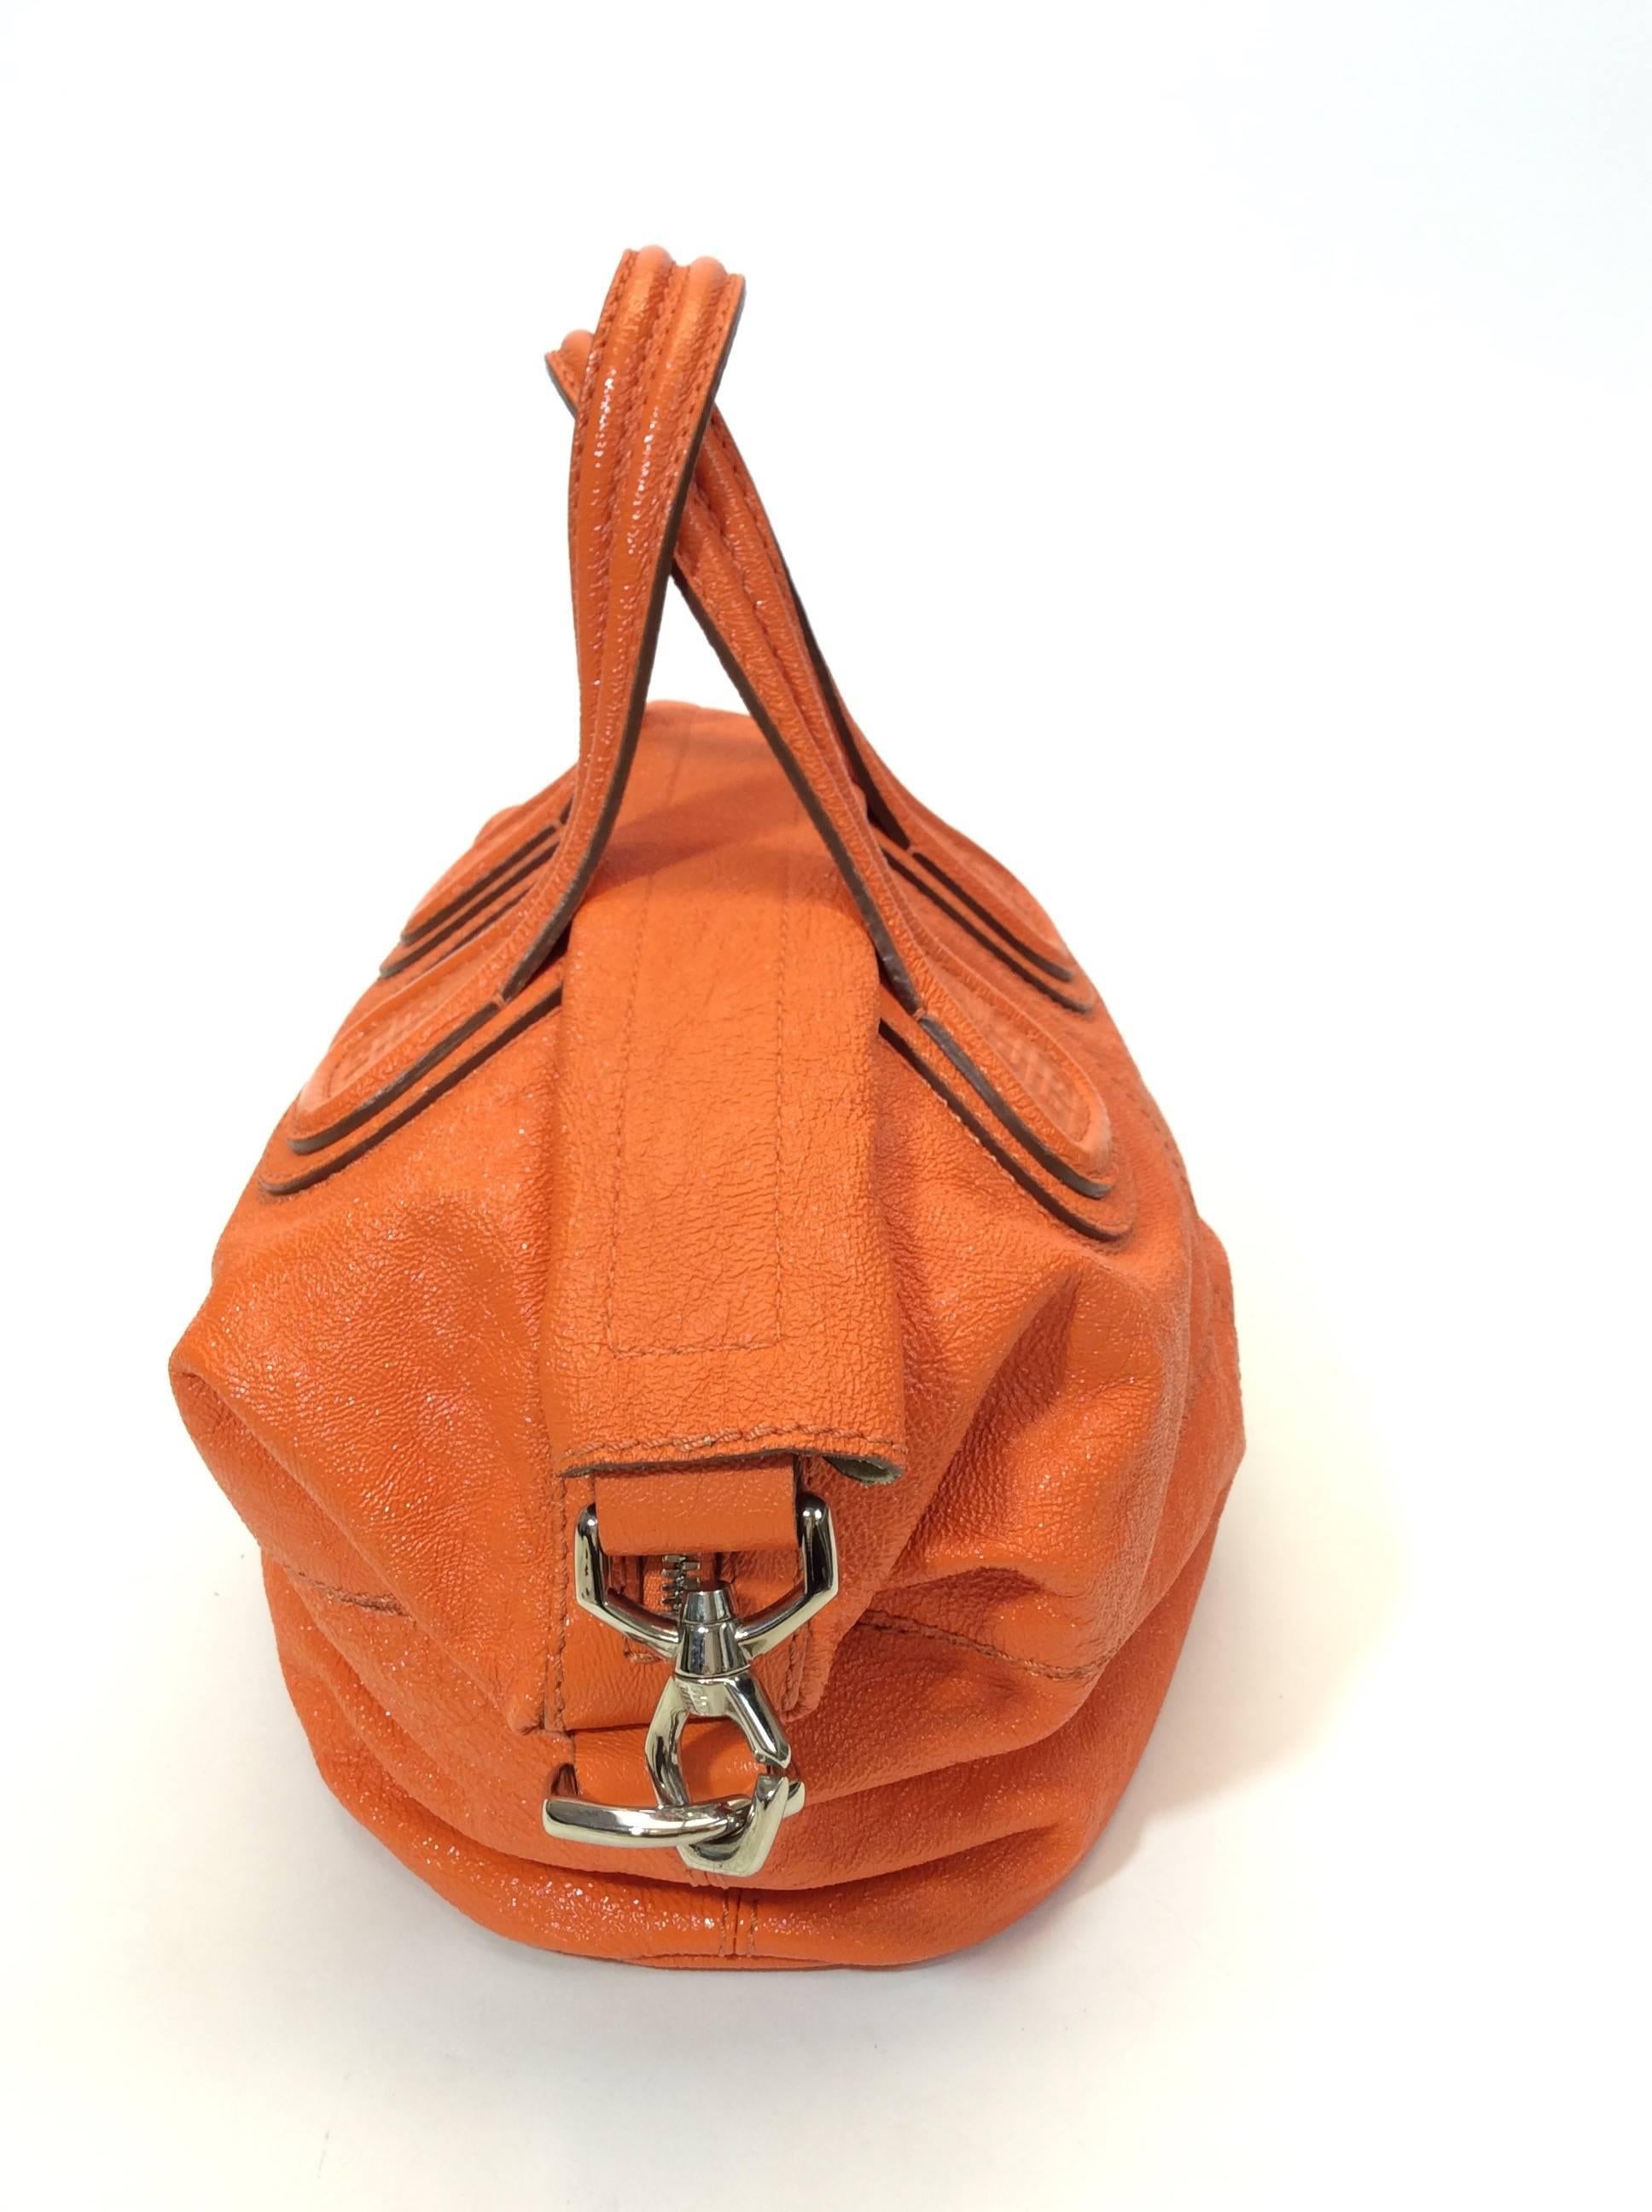 Genuine Orange Leather
Tan Suede Interior
Zipper on Top Strap
Pockets on Interior
Silver Hardware
Two Top Handle Straps (5" Inch Strap Drop)
11" Inch Long Strap Drop
